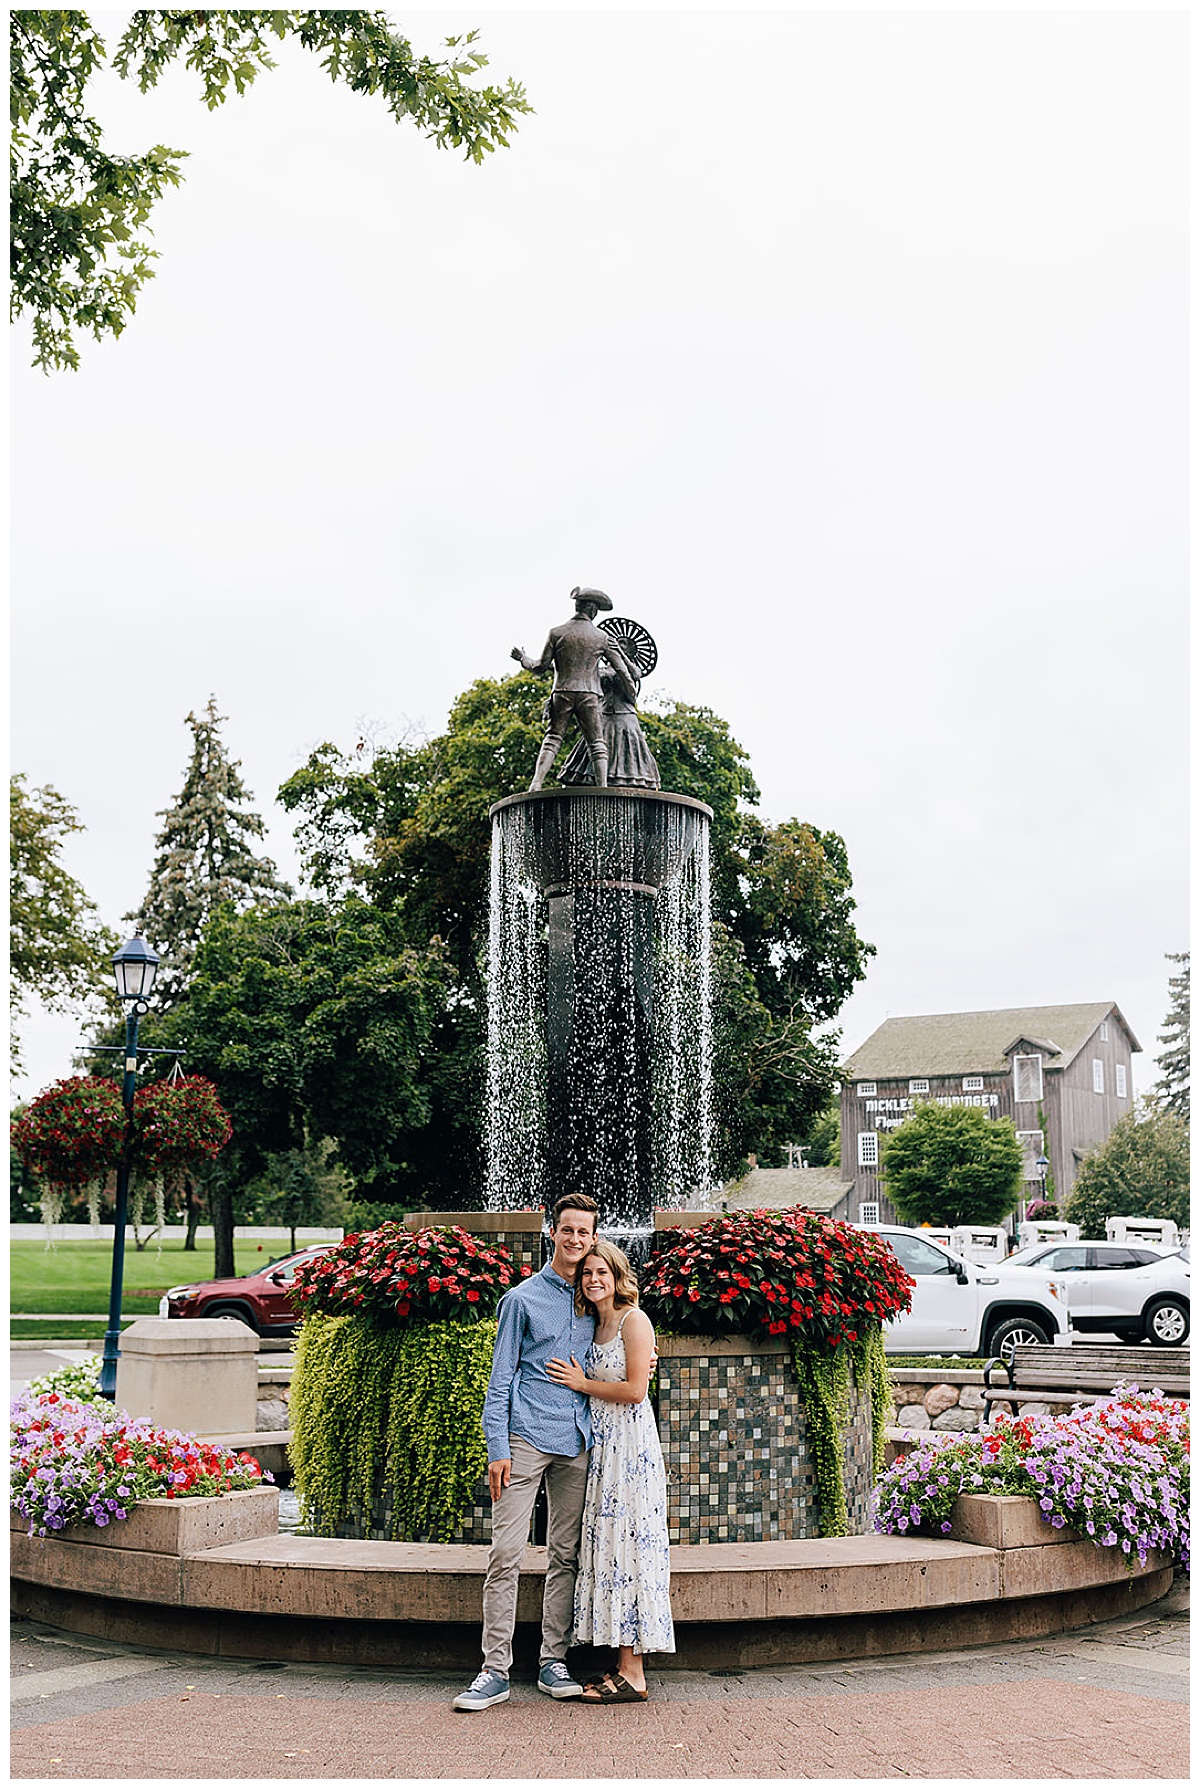 Soon to be husband and wife stand together after Zehnder’s Fountain Proposal